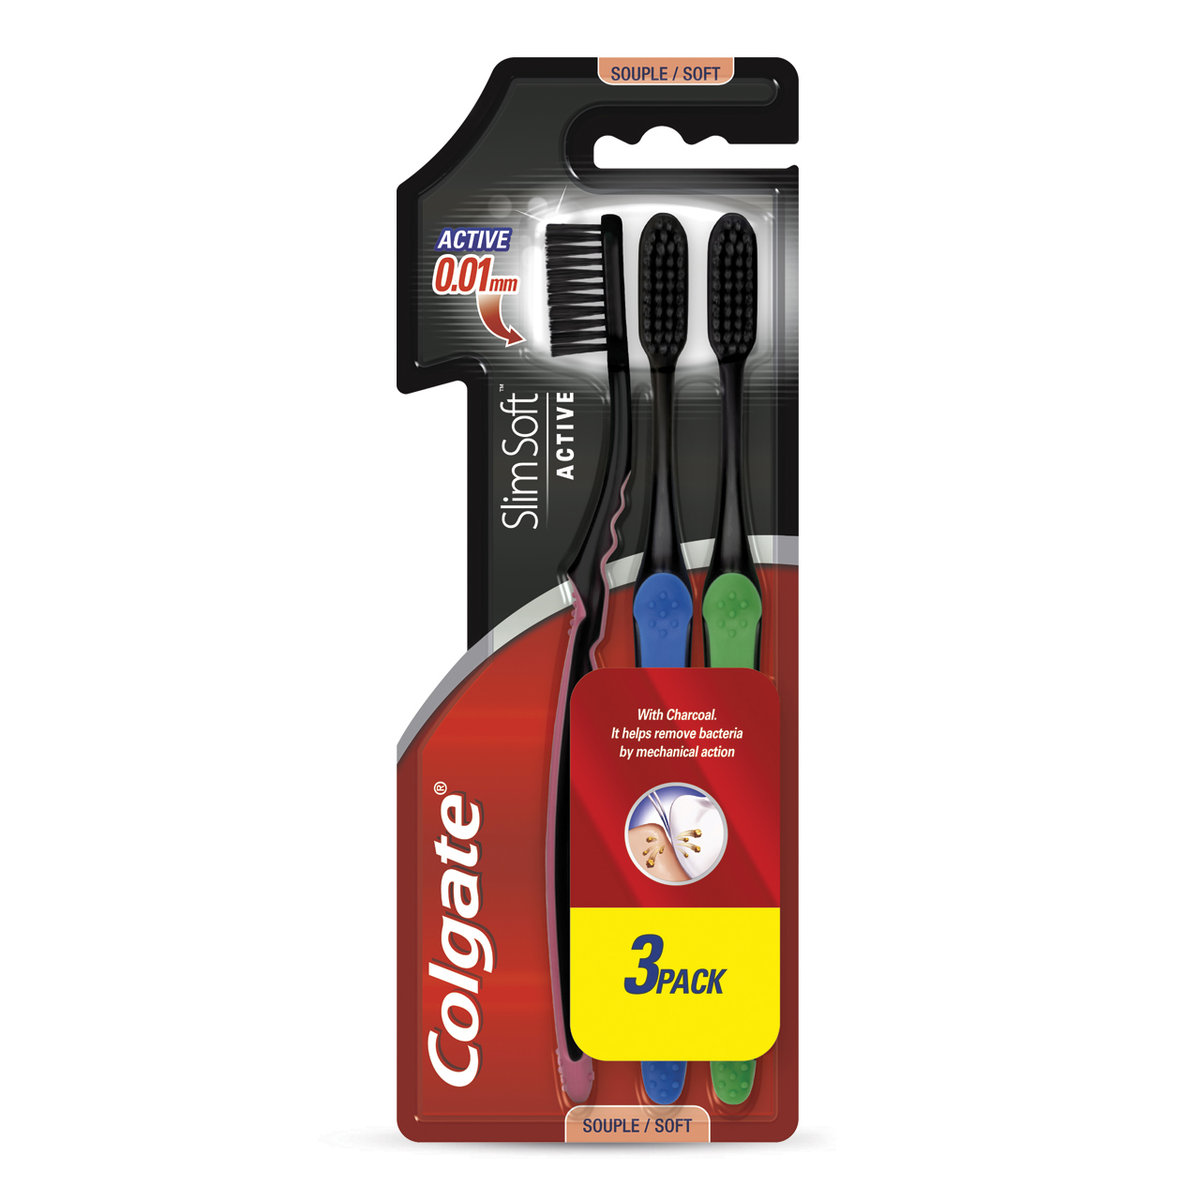 Colgate Slim Ultra Soft Charcoal Active Carbon Toothbrush 3 p